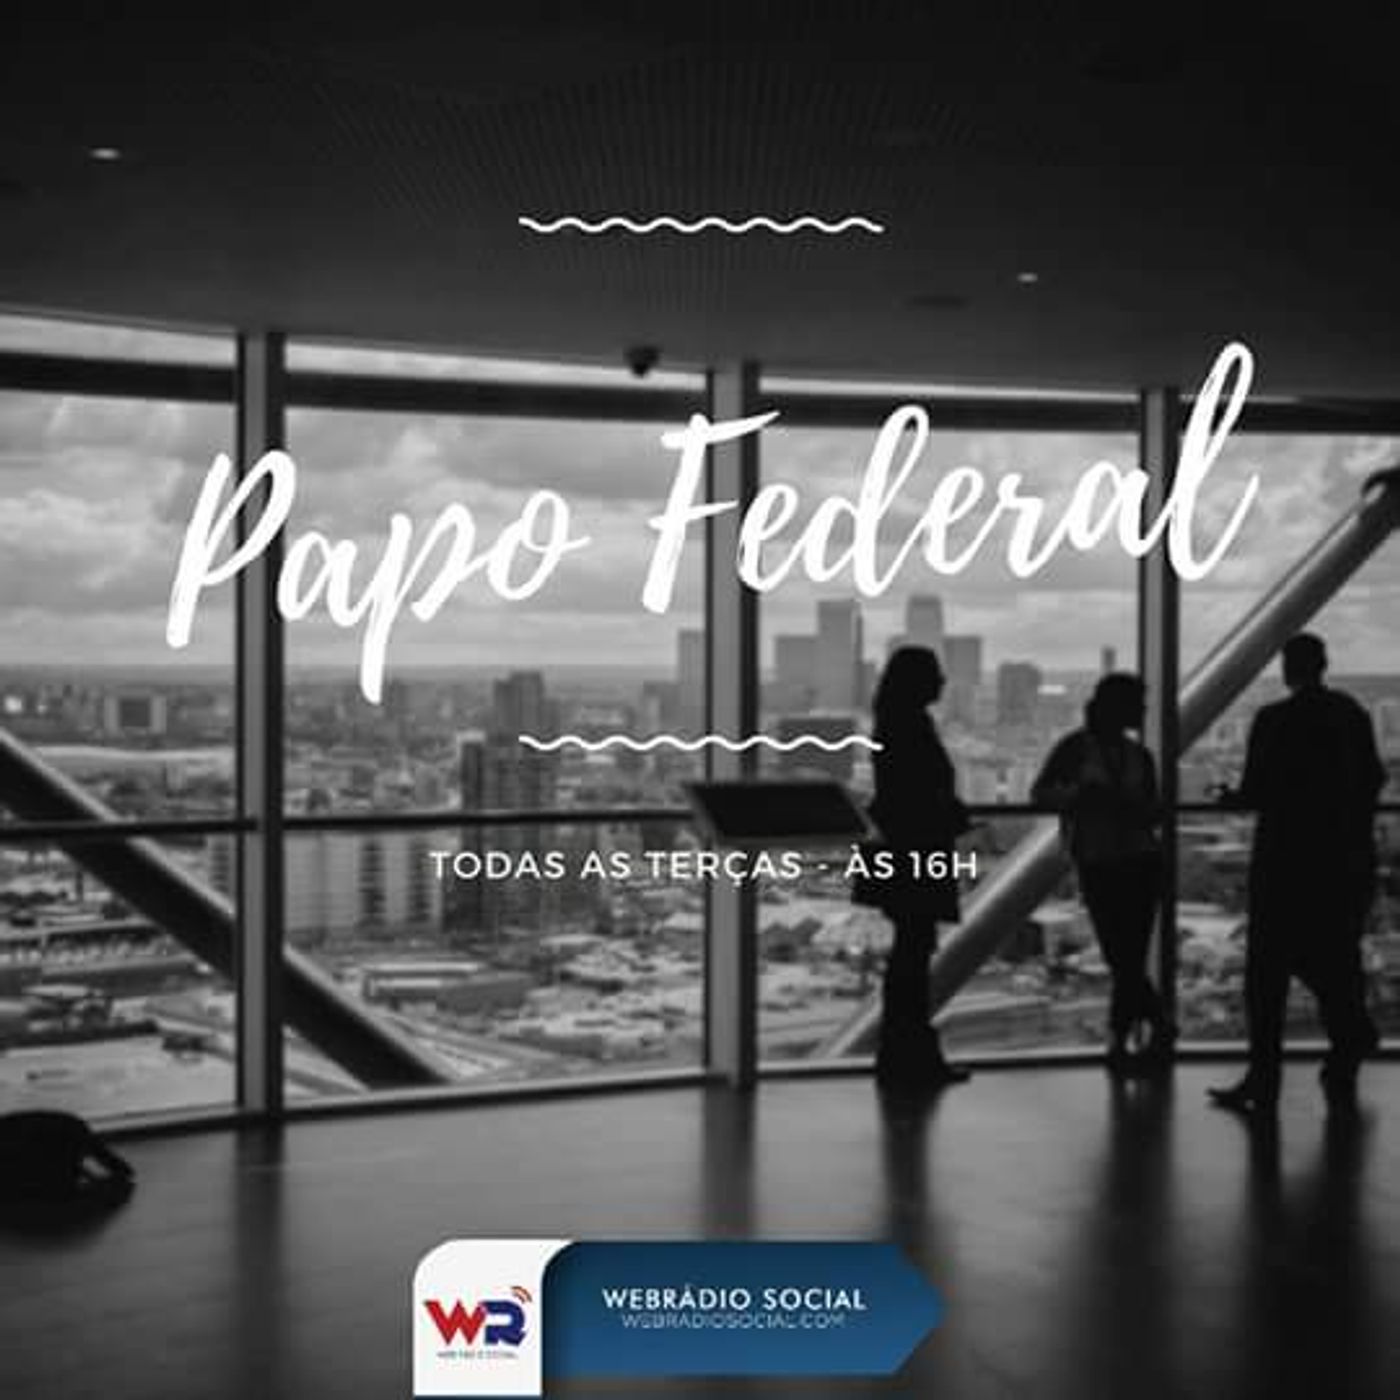 Papo Federal 27/02/2018